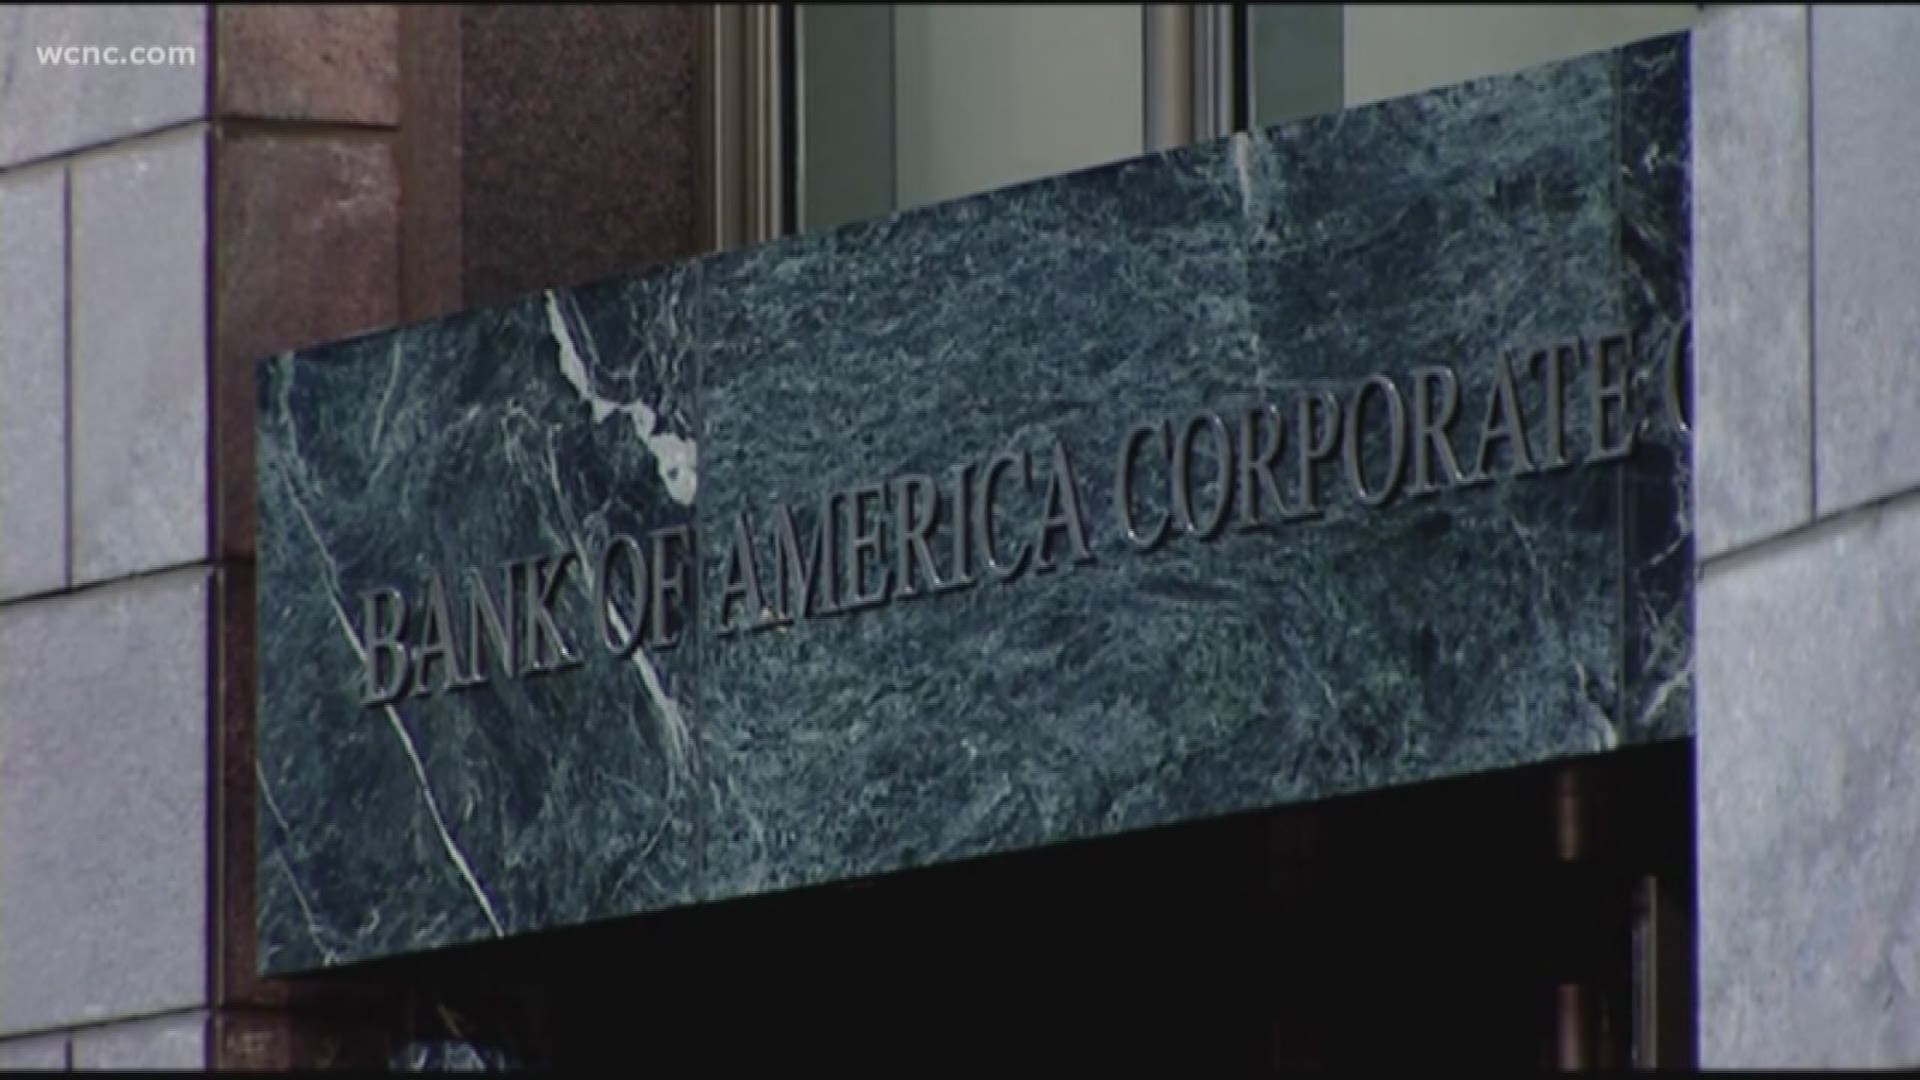 Bank of America has been named one of the 100 best companies to work for by Fortune magazine.